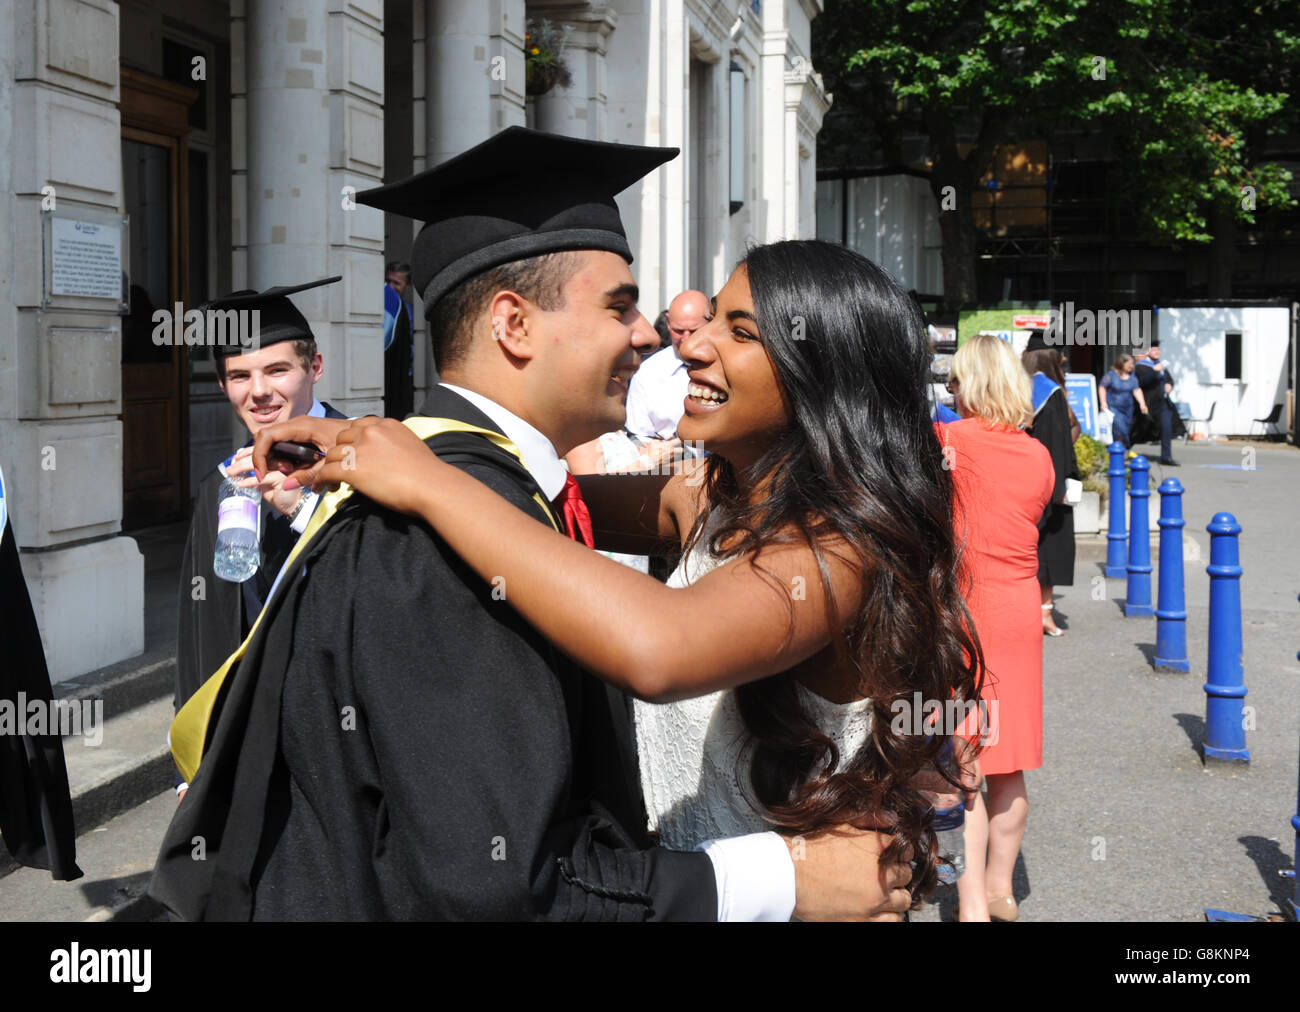 Girlfriend wholeheartedly congratulating and hugging with loving smiles her graduating friend in full gown with hat at Queen Mary London University. Stock Photo